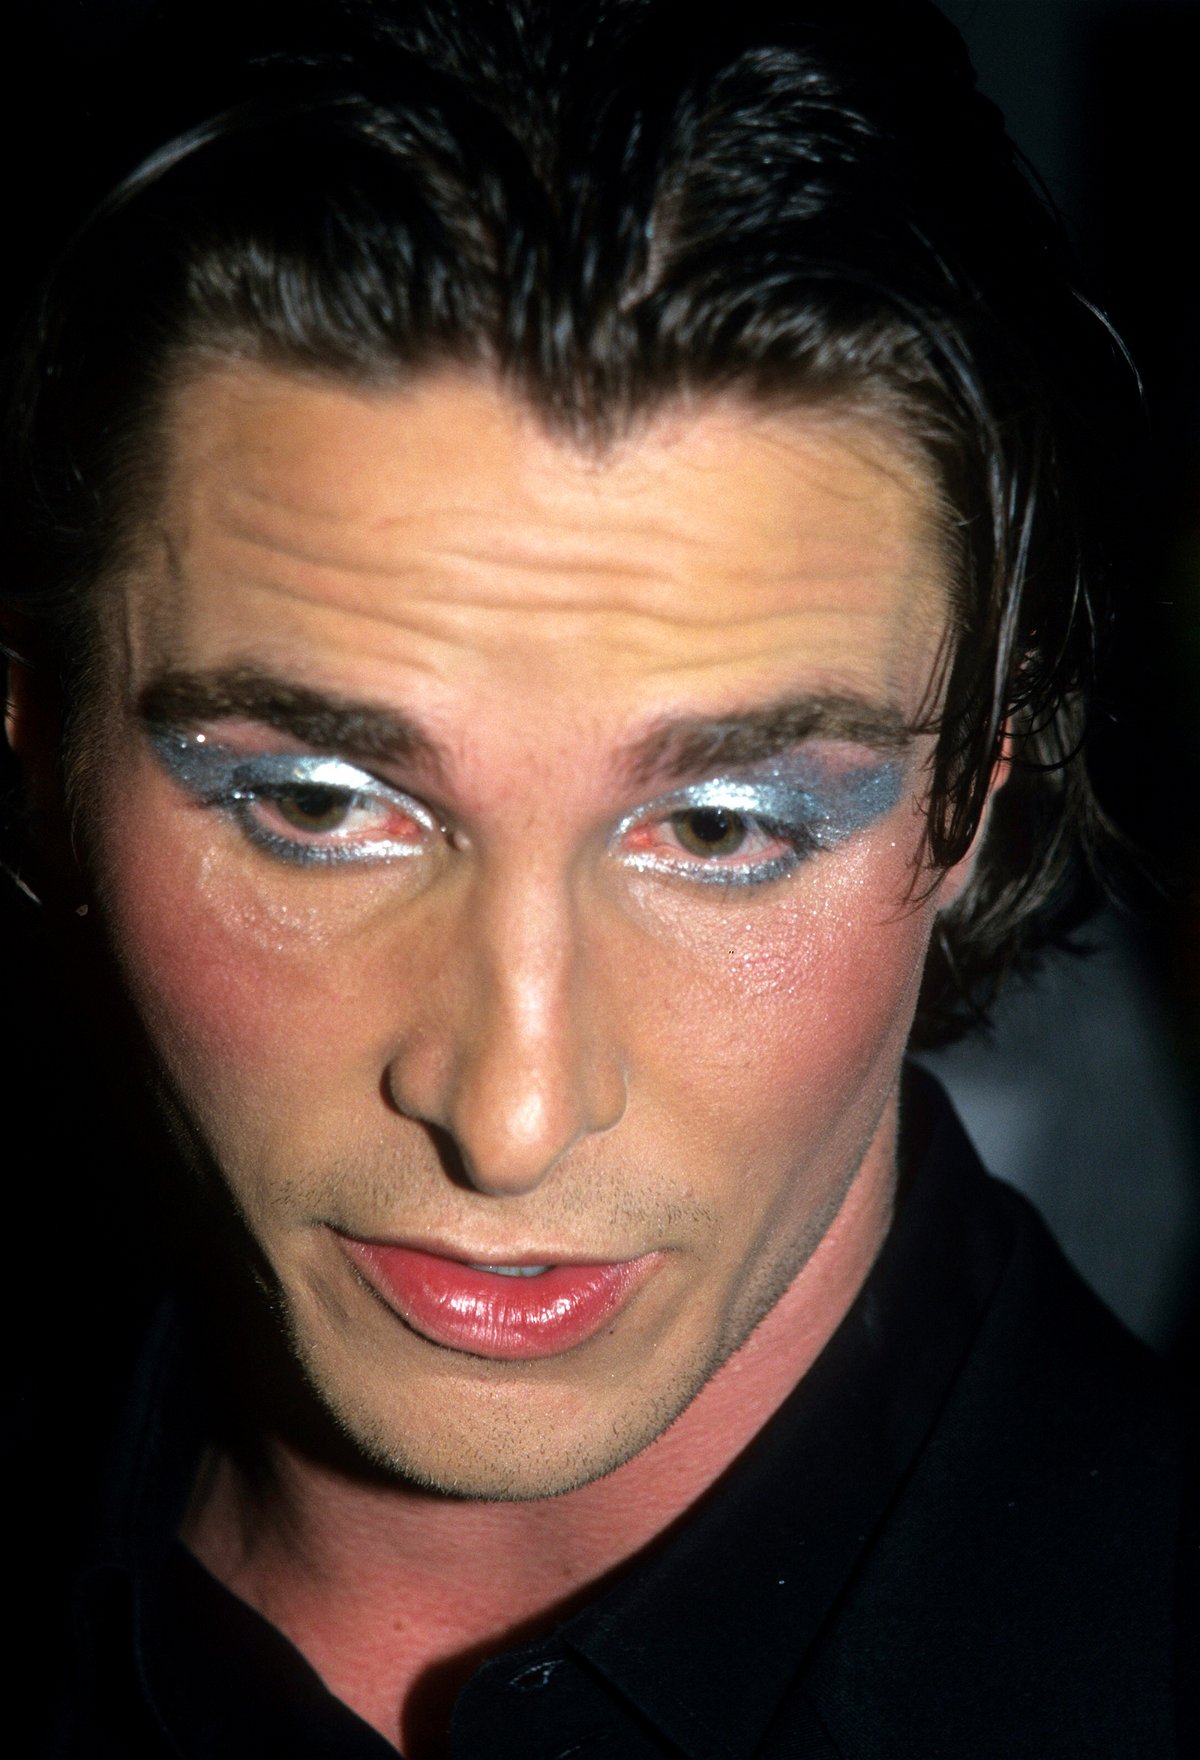 <i>Steve Eichner/Archive Photos/Getty Images</i><br/>The silver make up was tied to the glam rock movie 